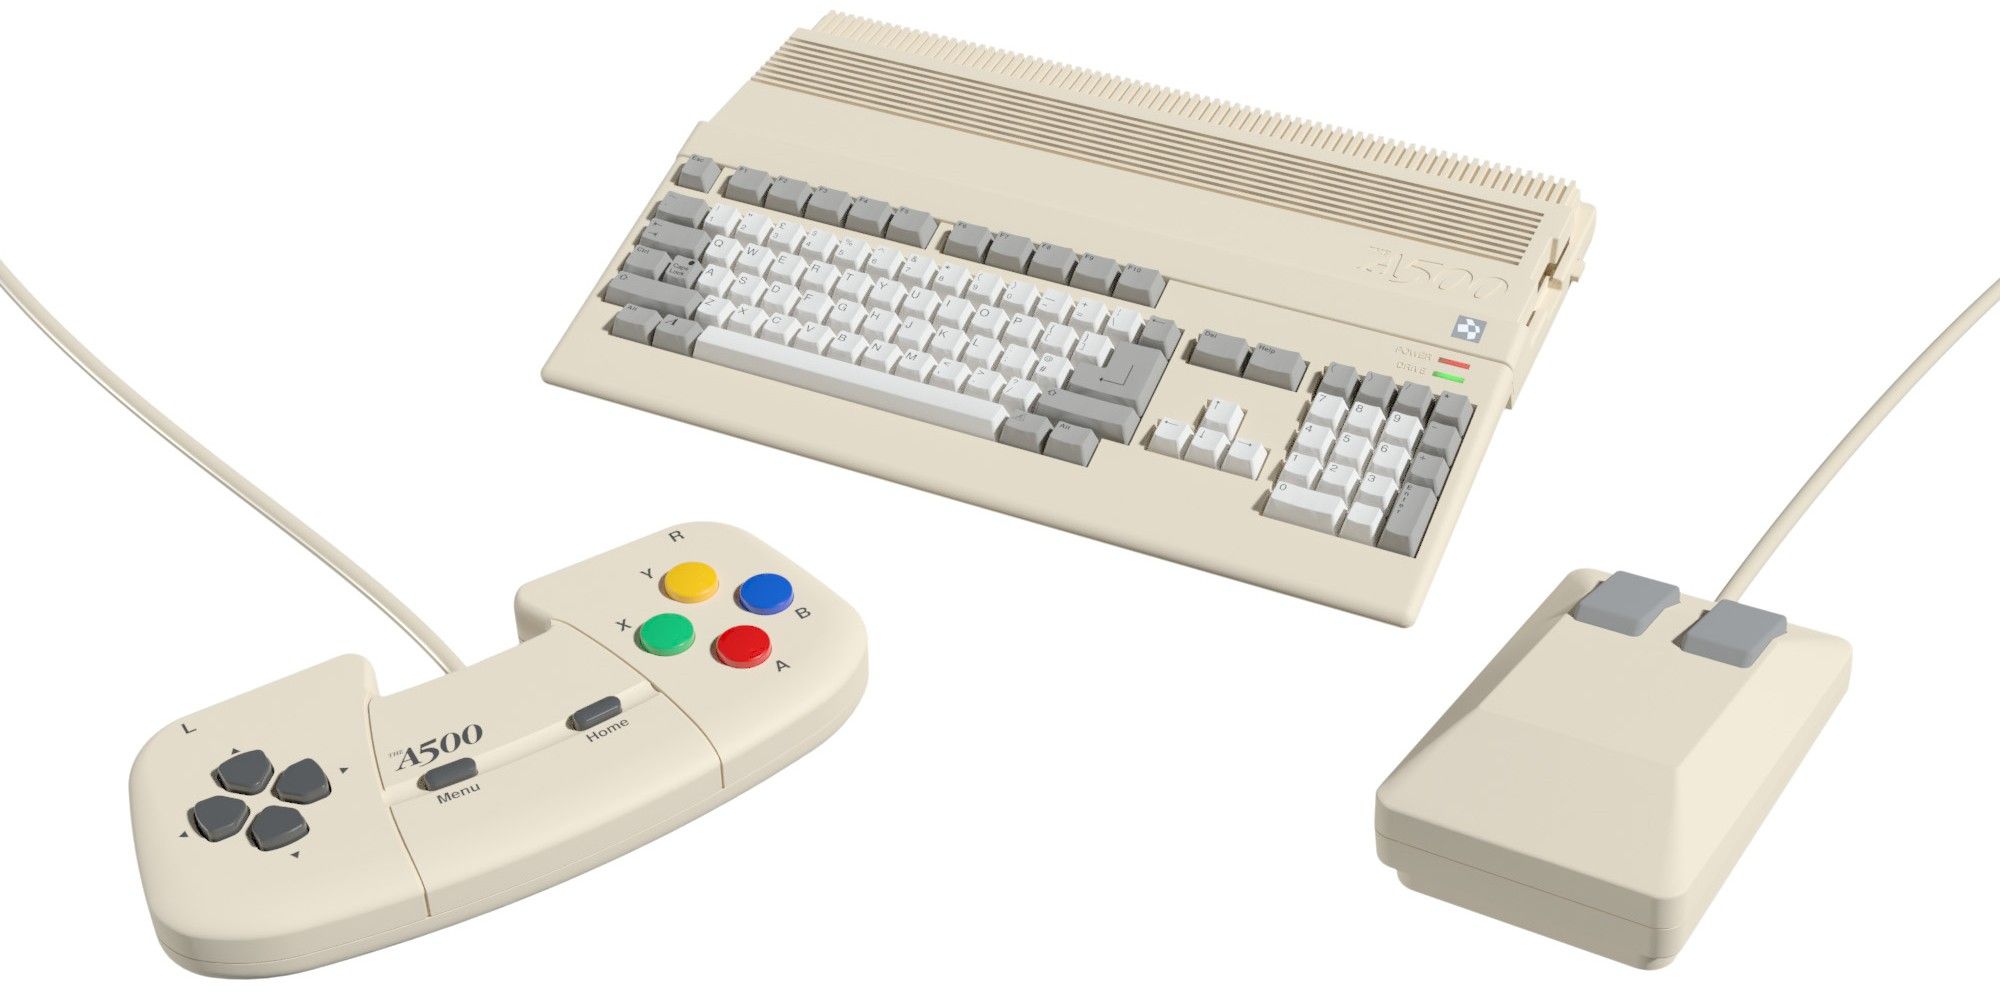 Amiga 500 Mini Announced For Early 2022 Includes Worms And 24 Other Classic Games